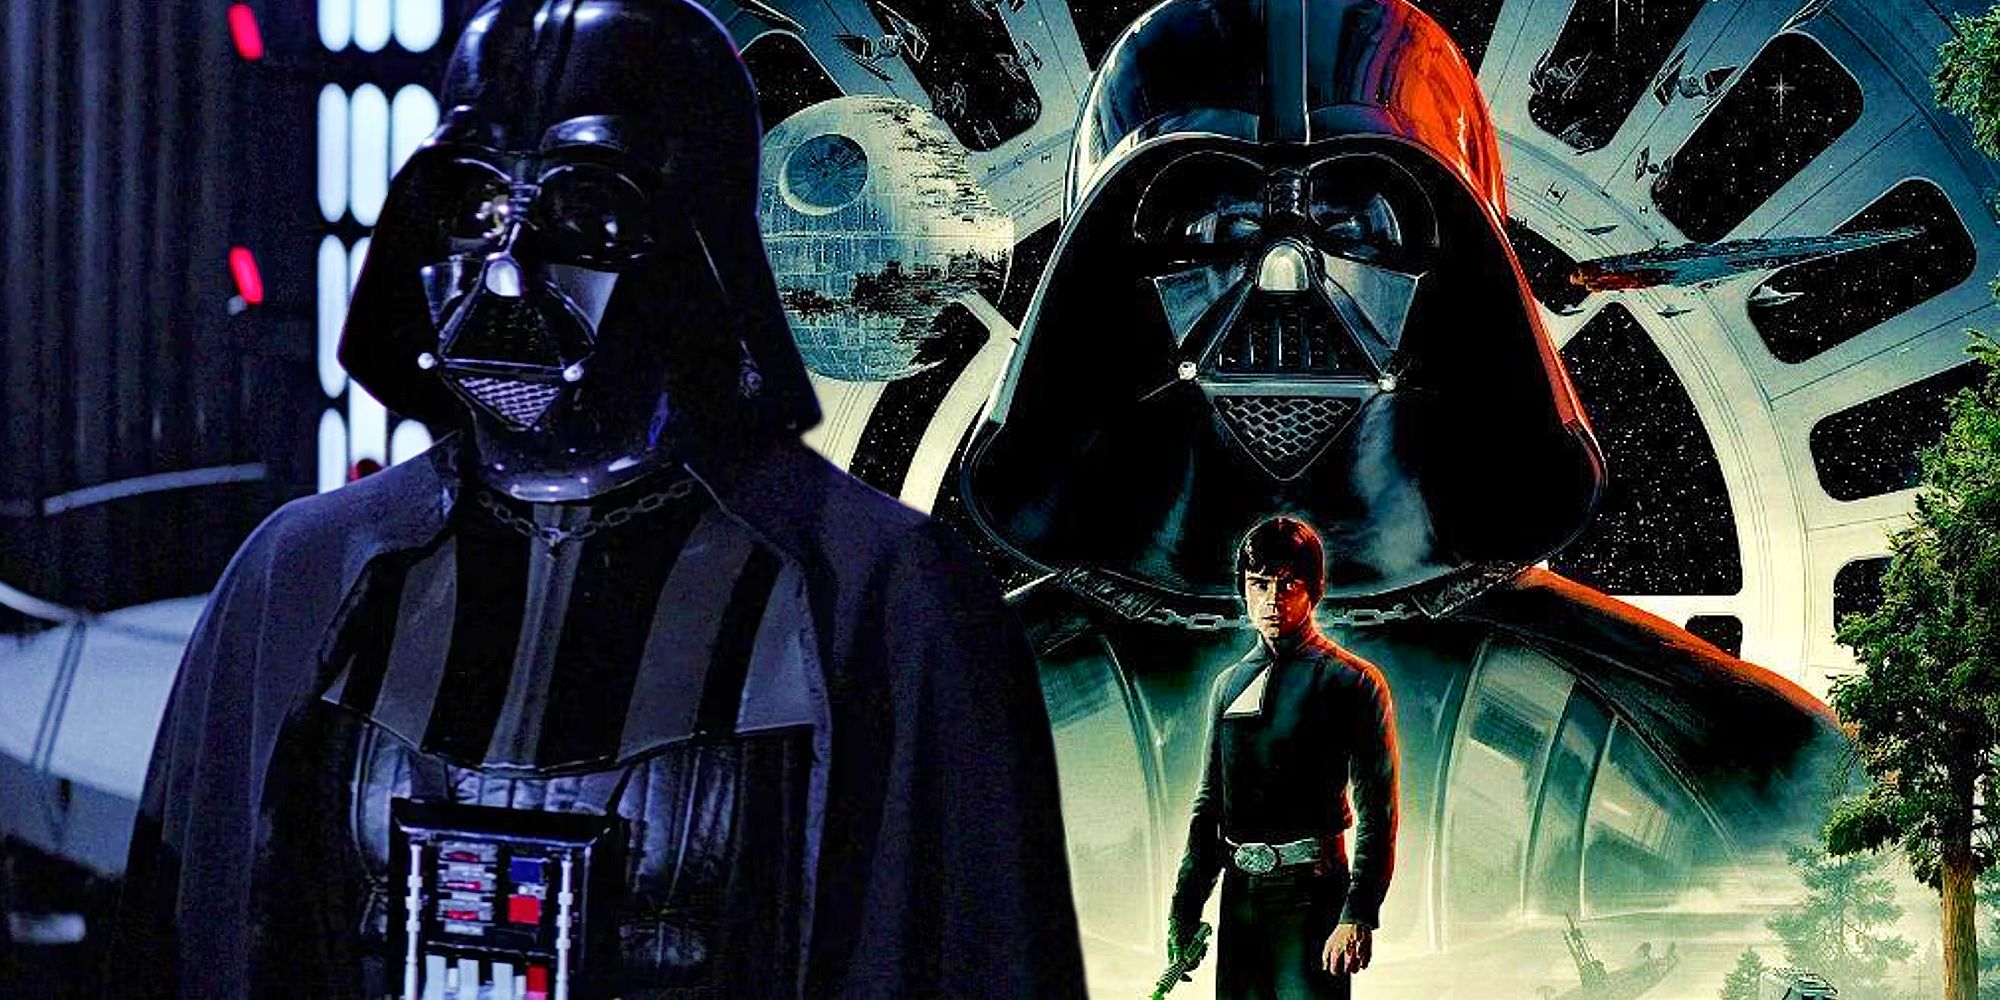 The 40th anniversary poster for Return of the Jedi showcasing Luke and Vader next to Vader from the film stood on the Death Star